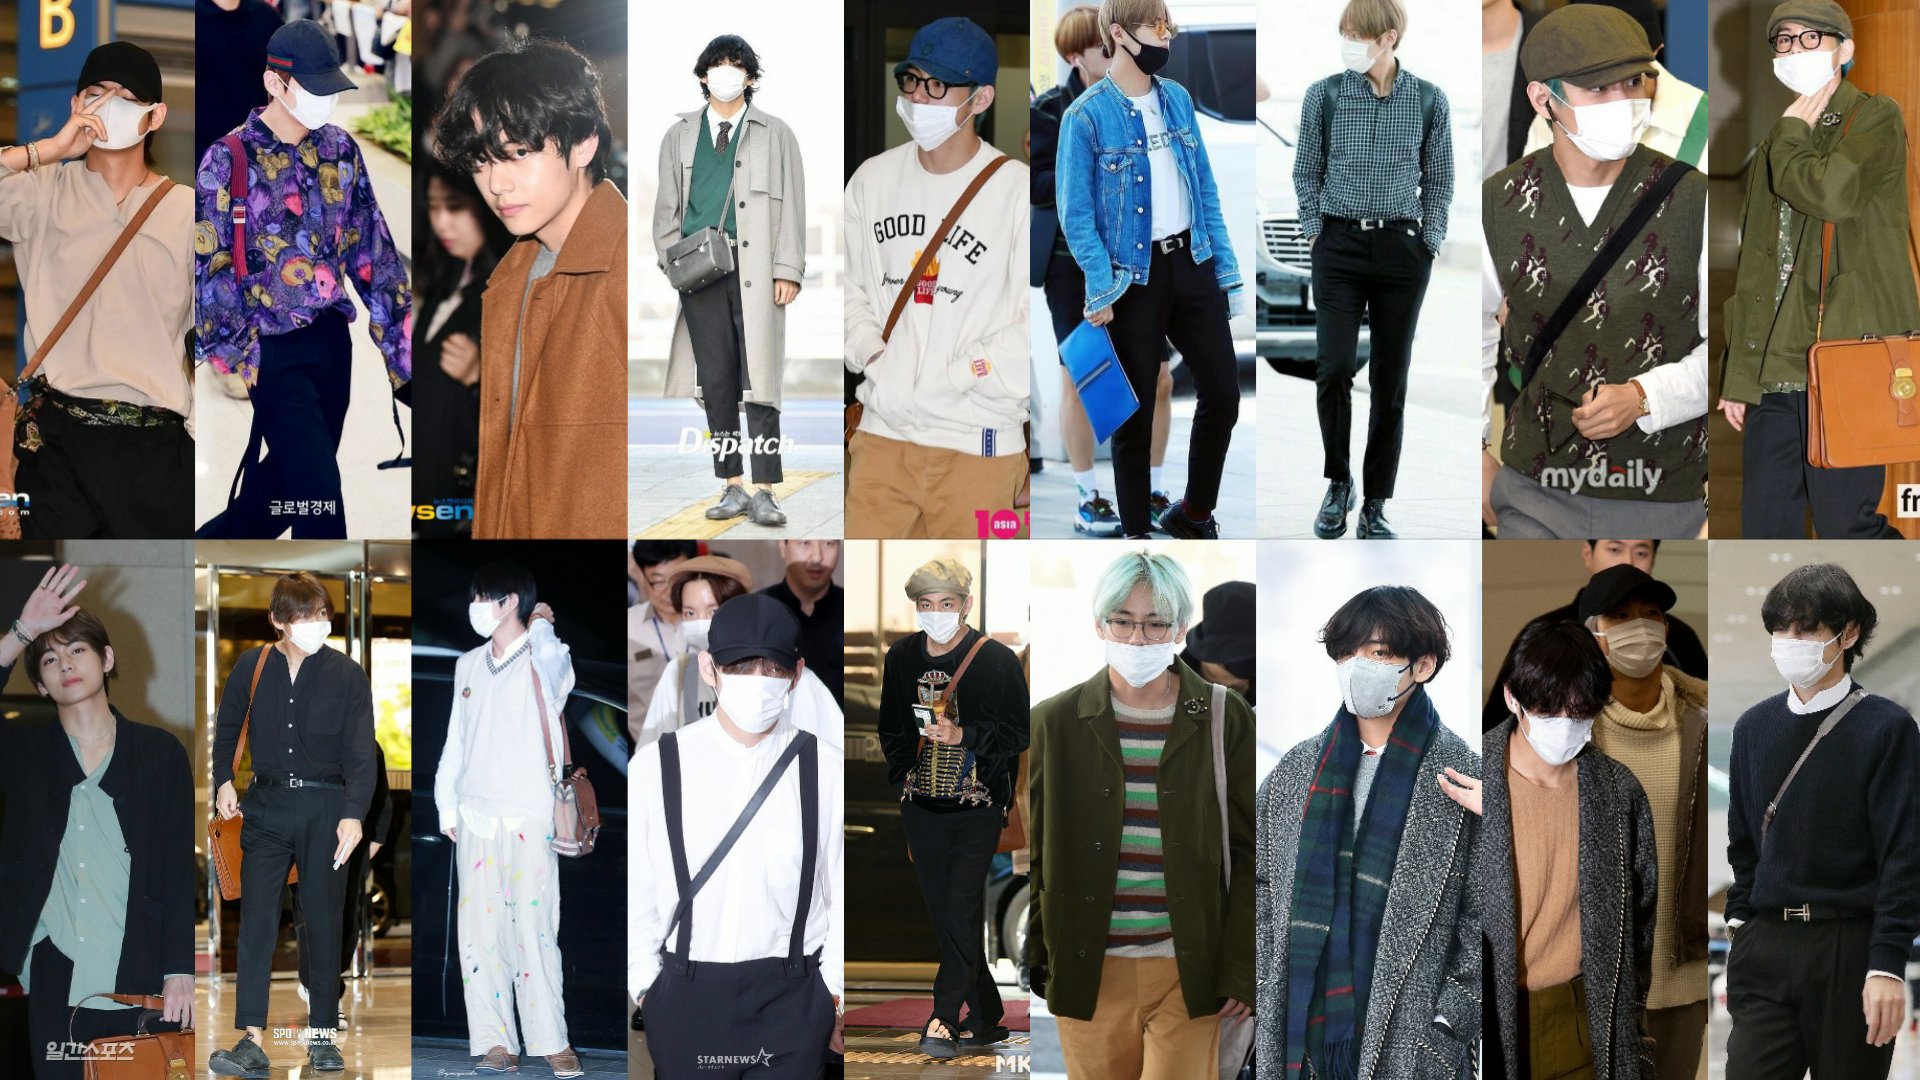 Japanese Fashion Magazine '25ans' selects BTS's V (Kim Taehyung) as the Top  Airport Fashion Icon Among Korean Celebrities